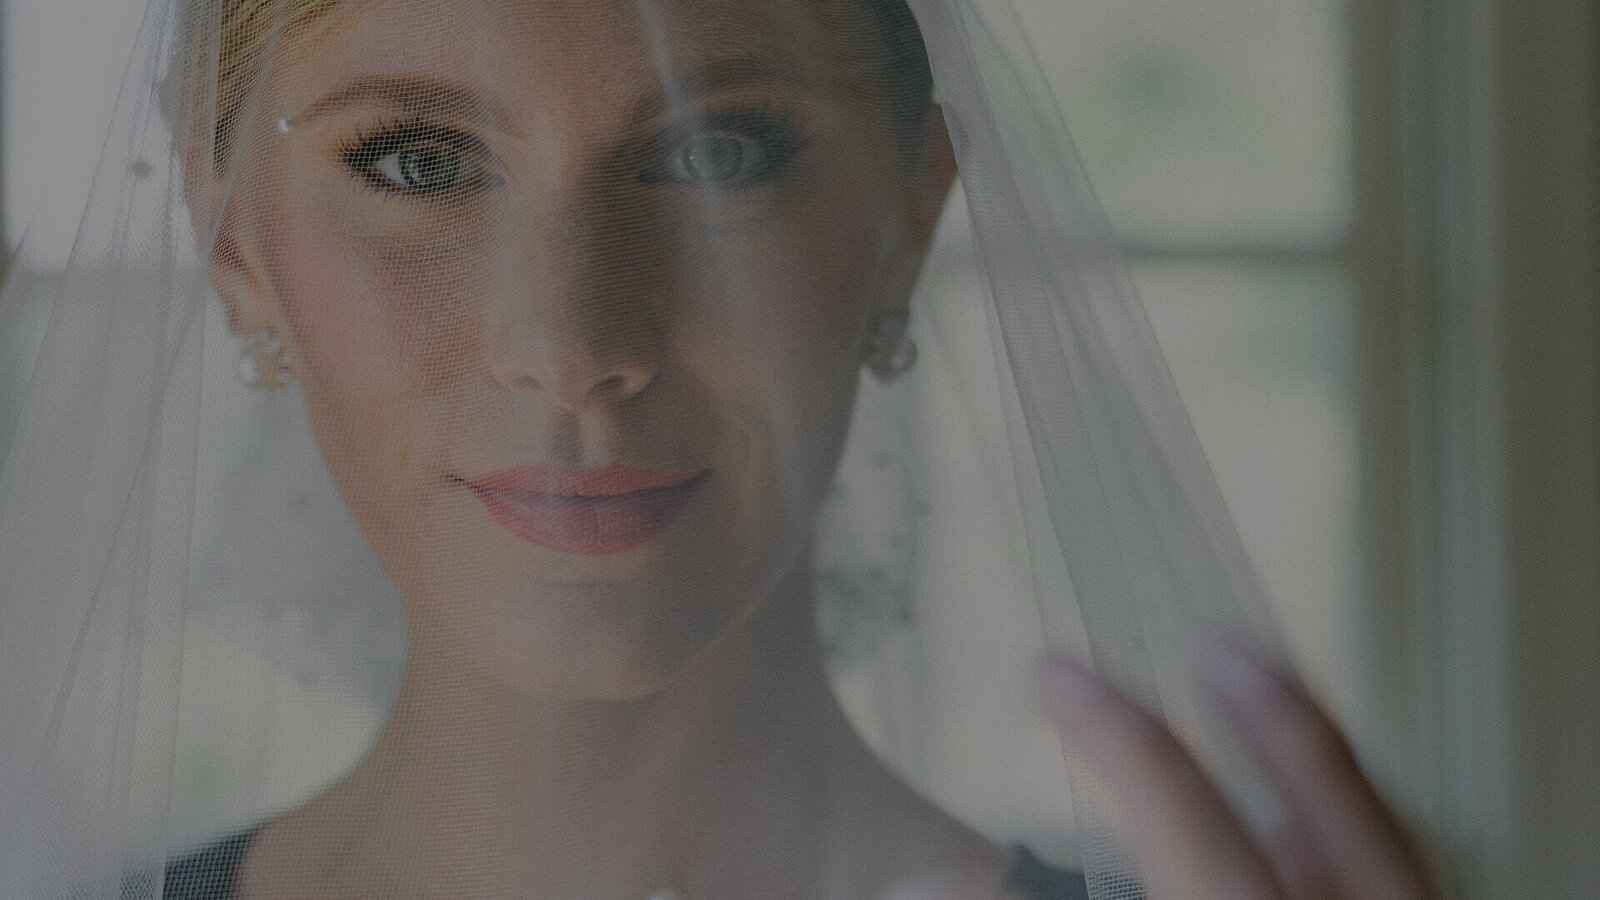 A stunning bride in a veil, captured in a portrait while holding her hand. Perfect for Getting Ready Photo ideas.